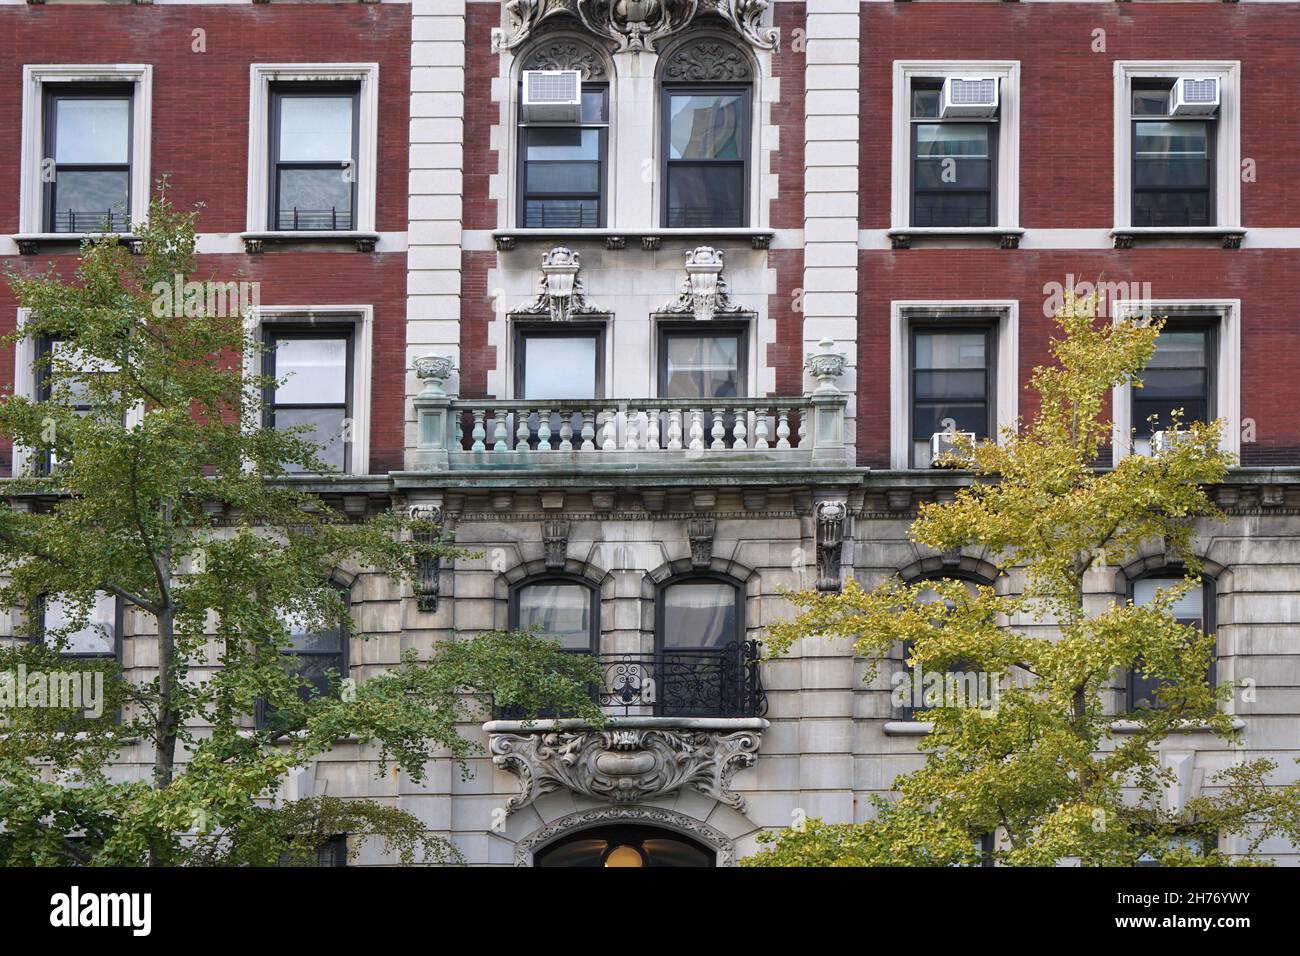 Old fashioned Manhattan apartment building facade with baroque architectural details Stock Photo